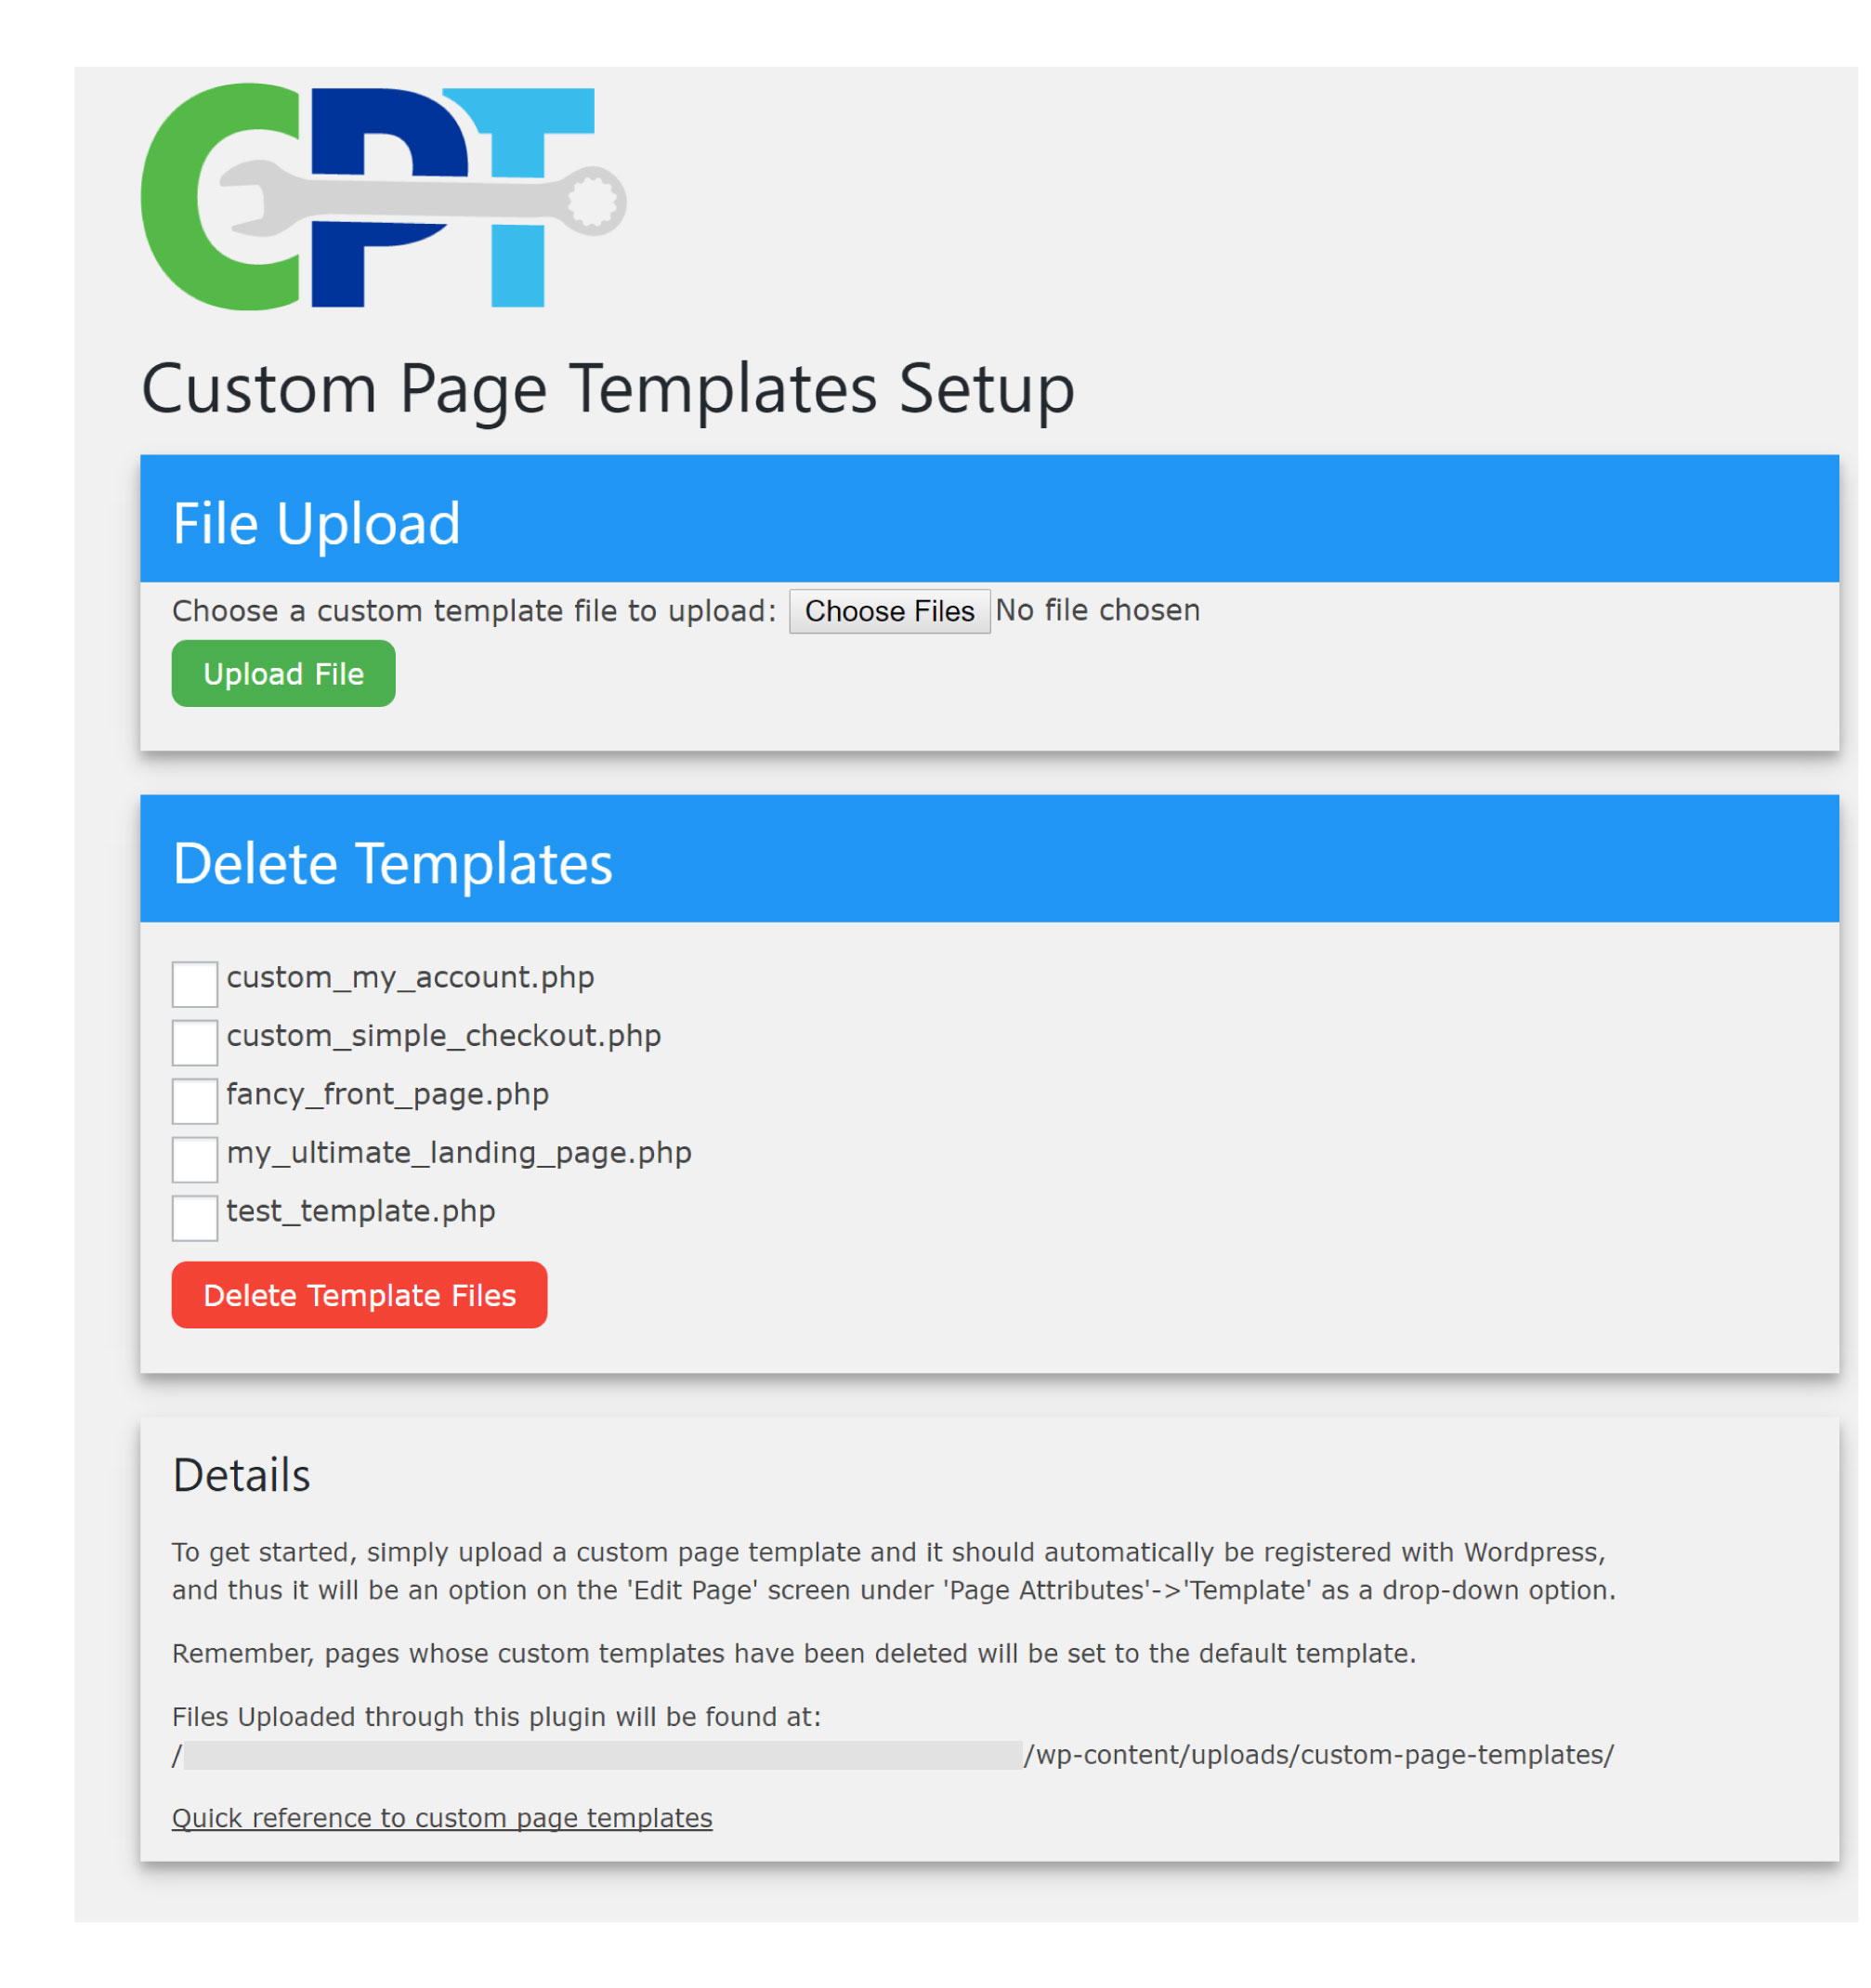 A clean user interface to manage user generated custom page templates.